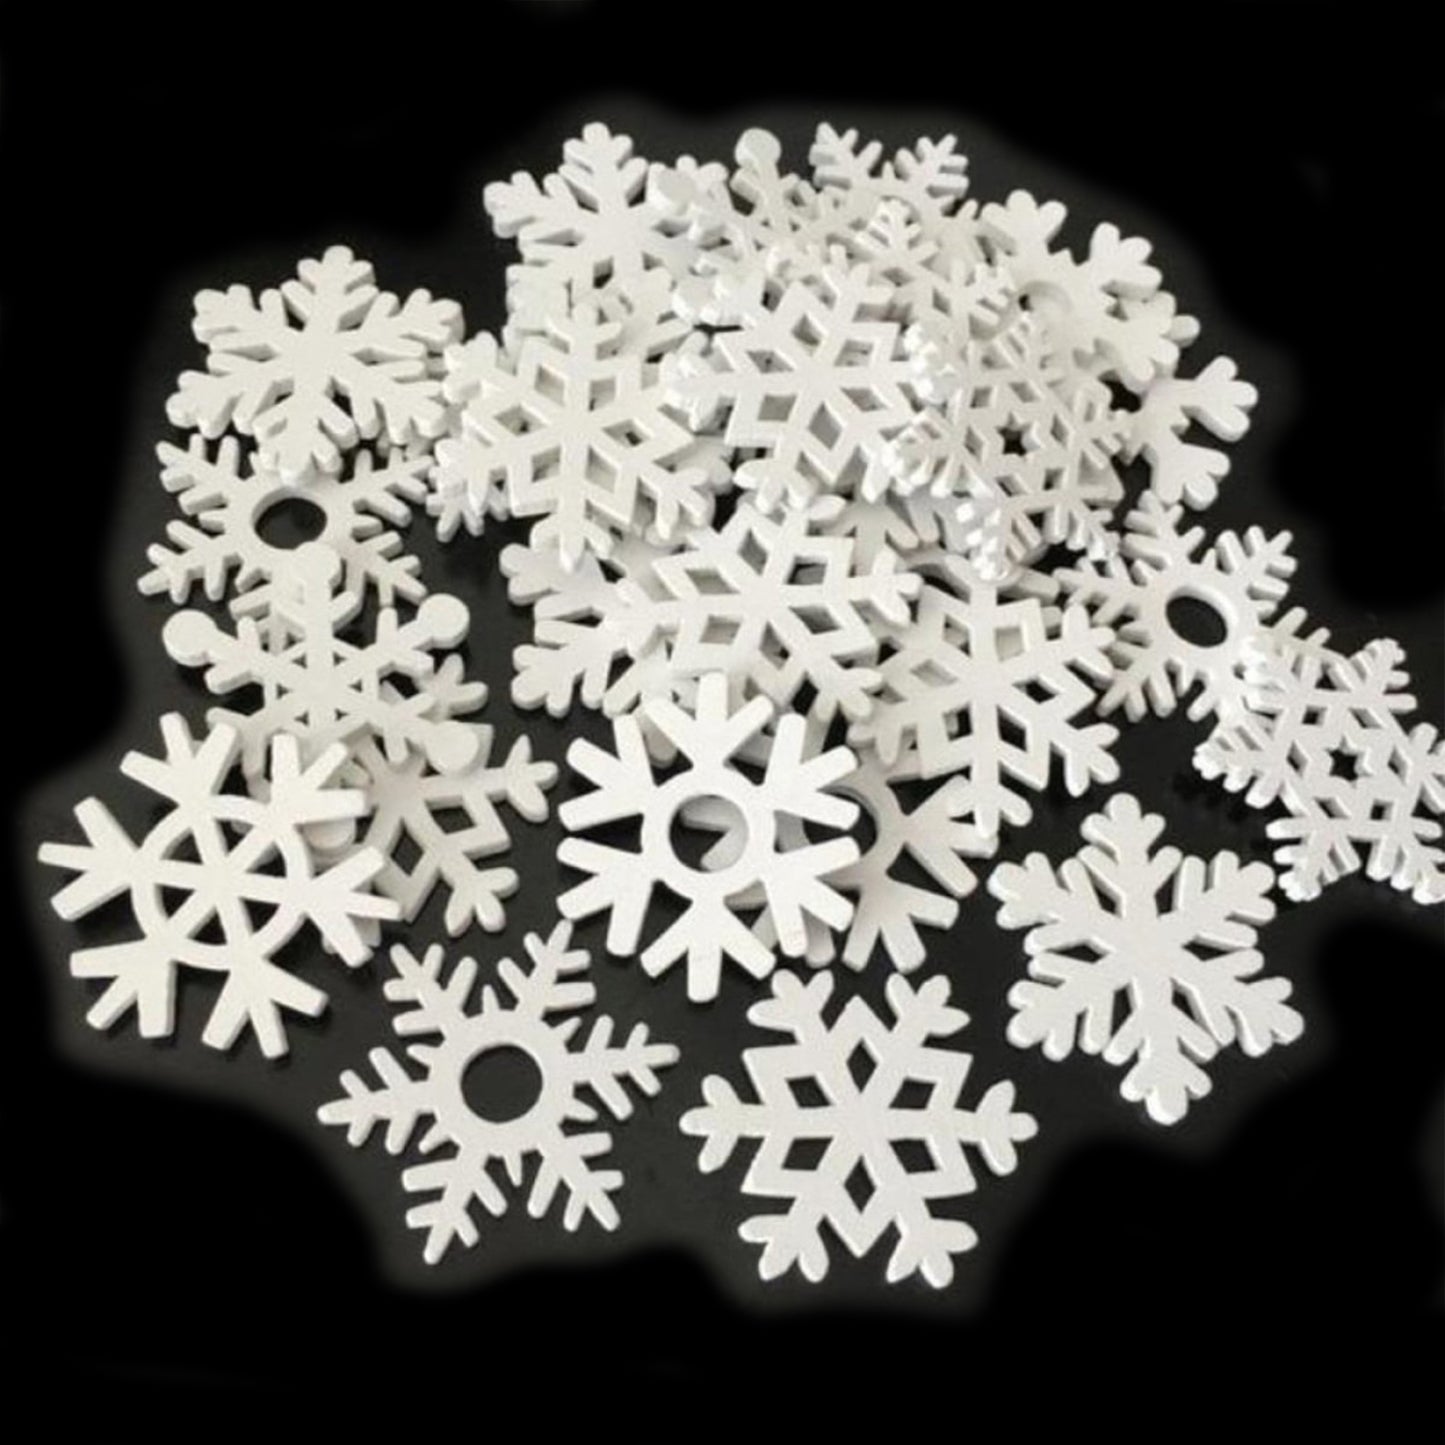 50pcs 3.5cm White Red Wooden Snowflakes Christmas Snow Craft Pendant Hanging Ornament Xmas New Year Decor Home Decorations